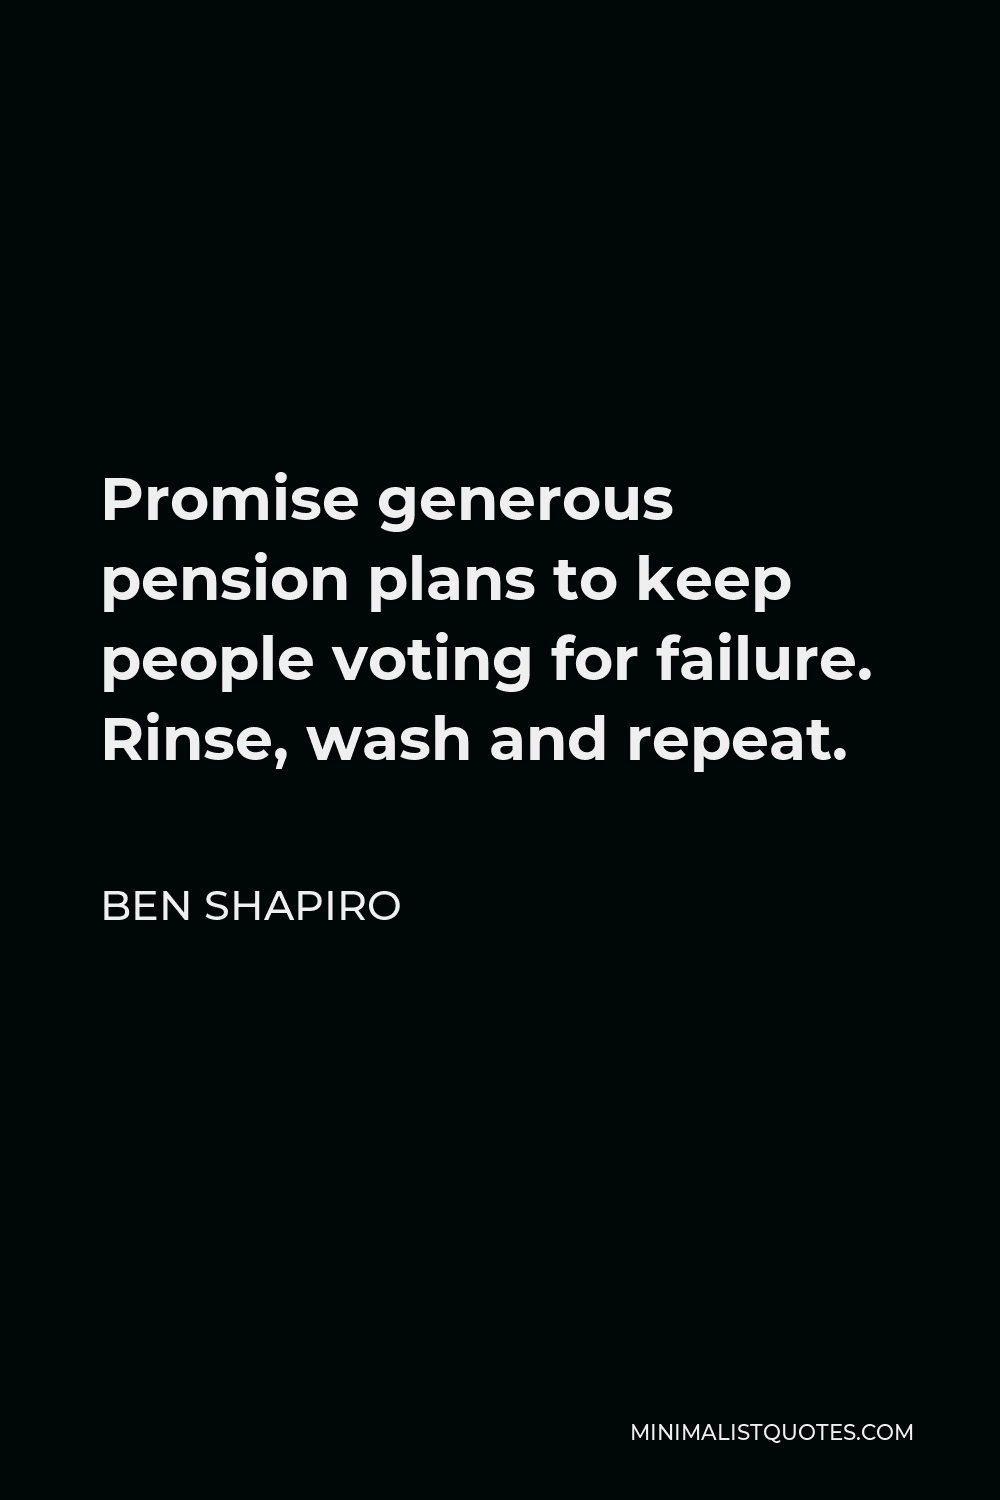 Ben Shapiro Quote - Promise generous pension plans to keep people voting for failure. Rinse, wash and repeat.